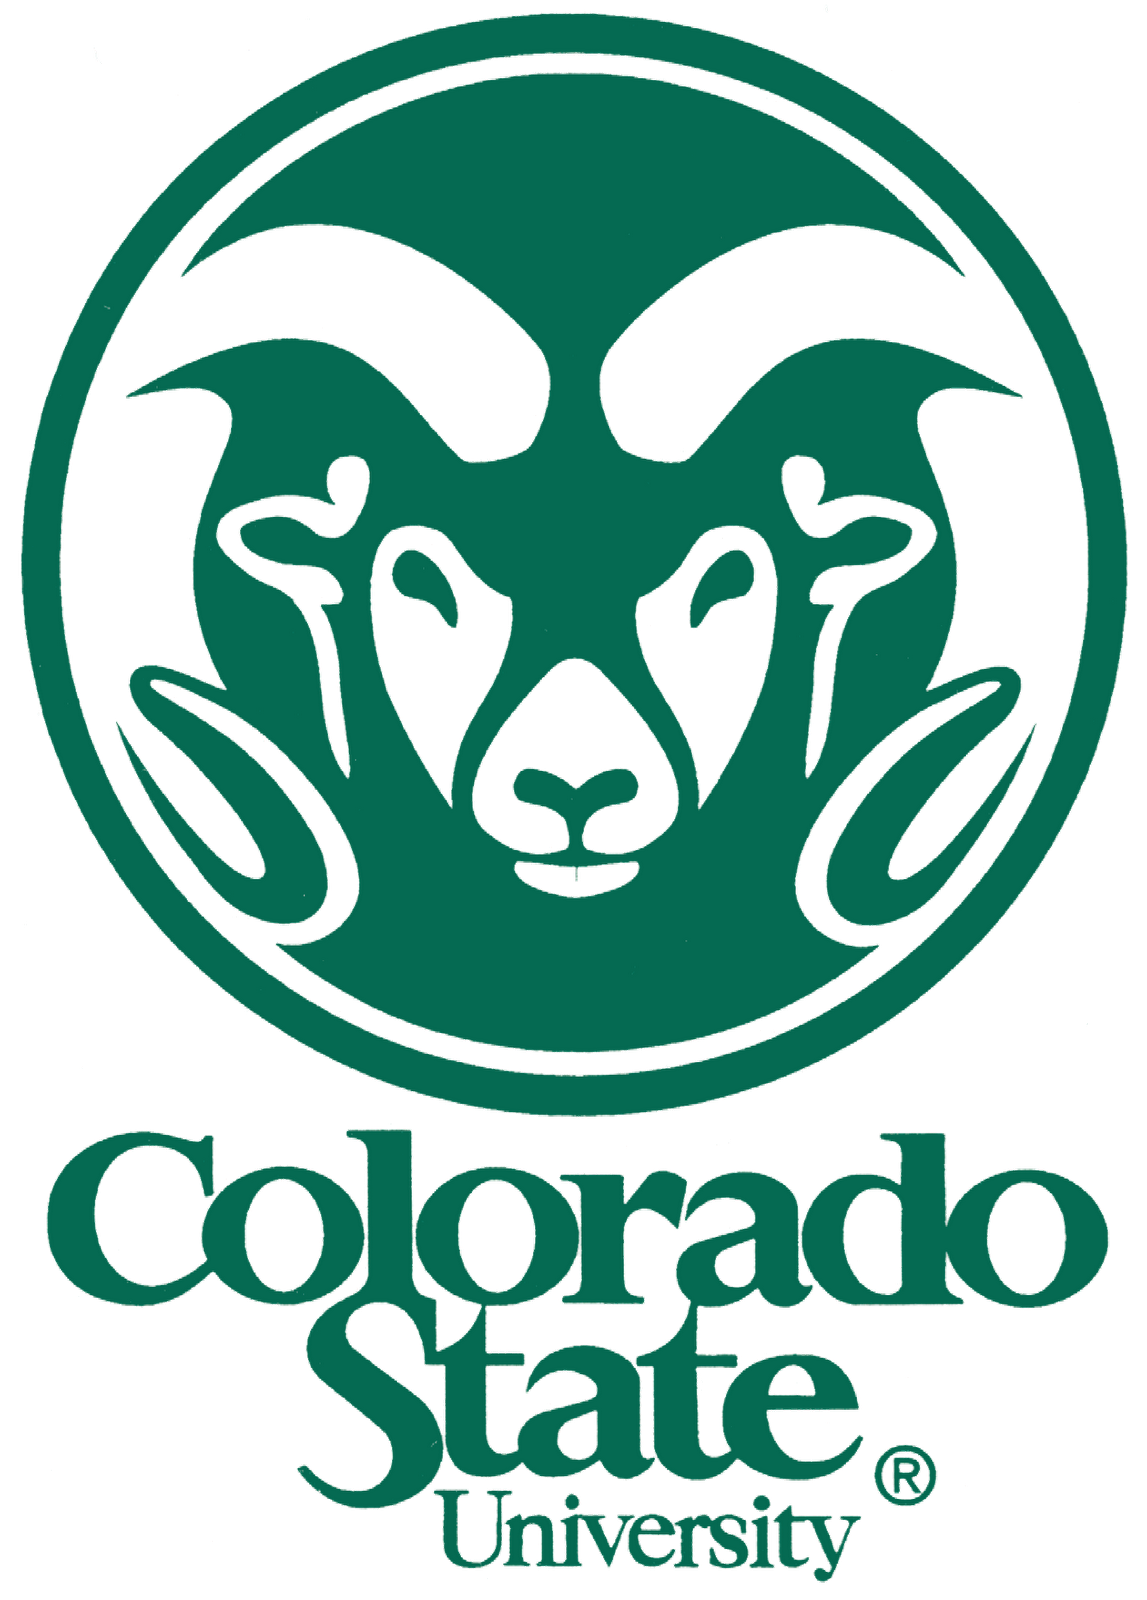 Colorado State University, College of Business, Department of Finance & Real Estate